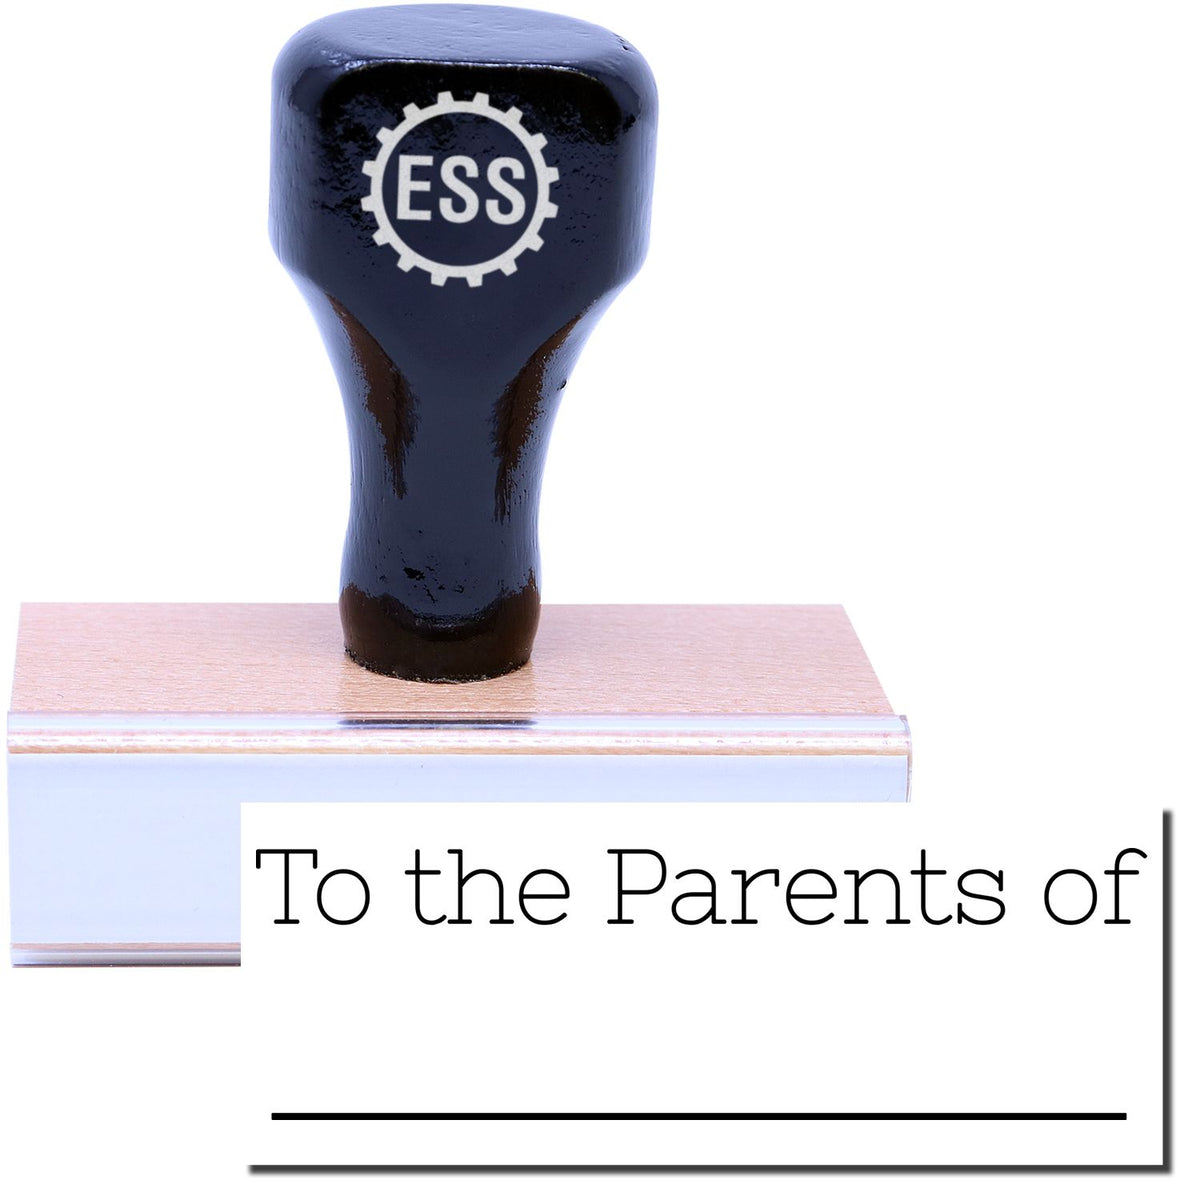 A stock office rubber stamp with a stamped image showing how the text &quot;To the Parents of&quot; in a large skinny font with a line underneath the text is displayed after stamping.